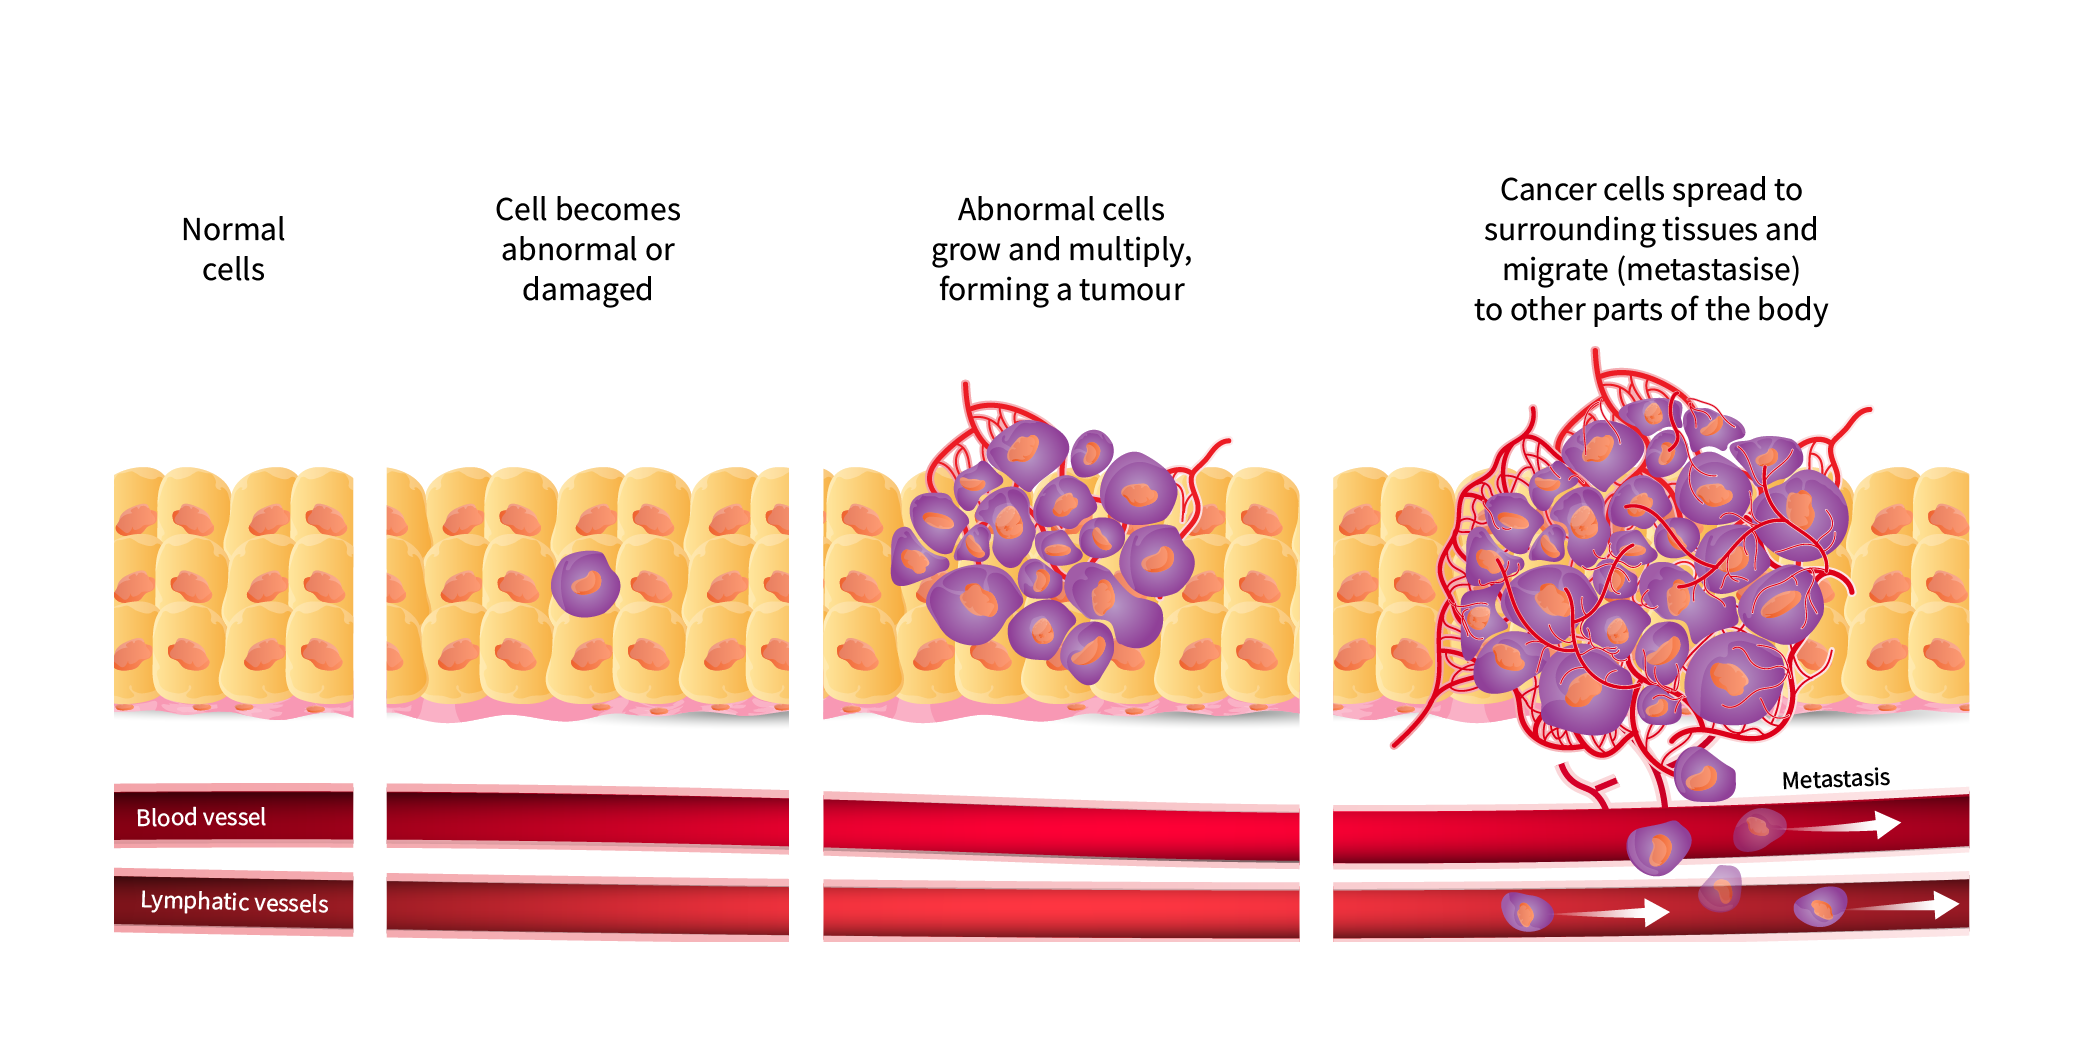 Diagram showing cancer cells spreading to surrounding tissues and migrate to other parts of the body